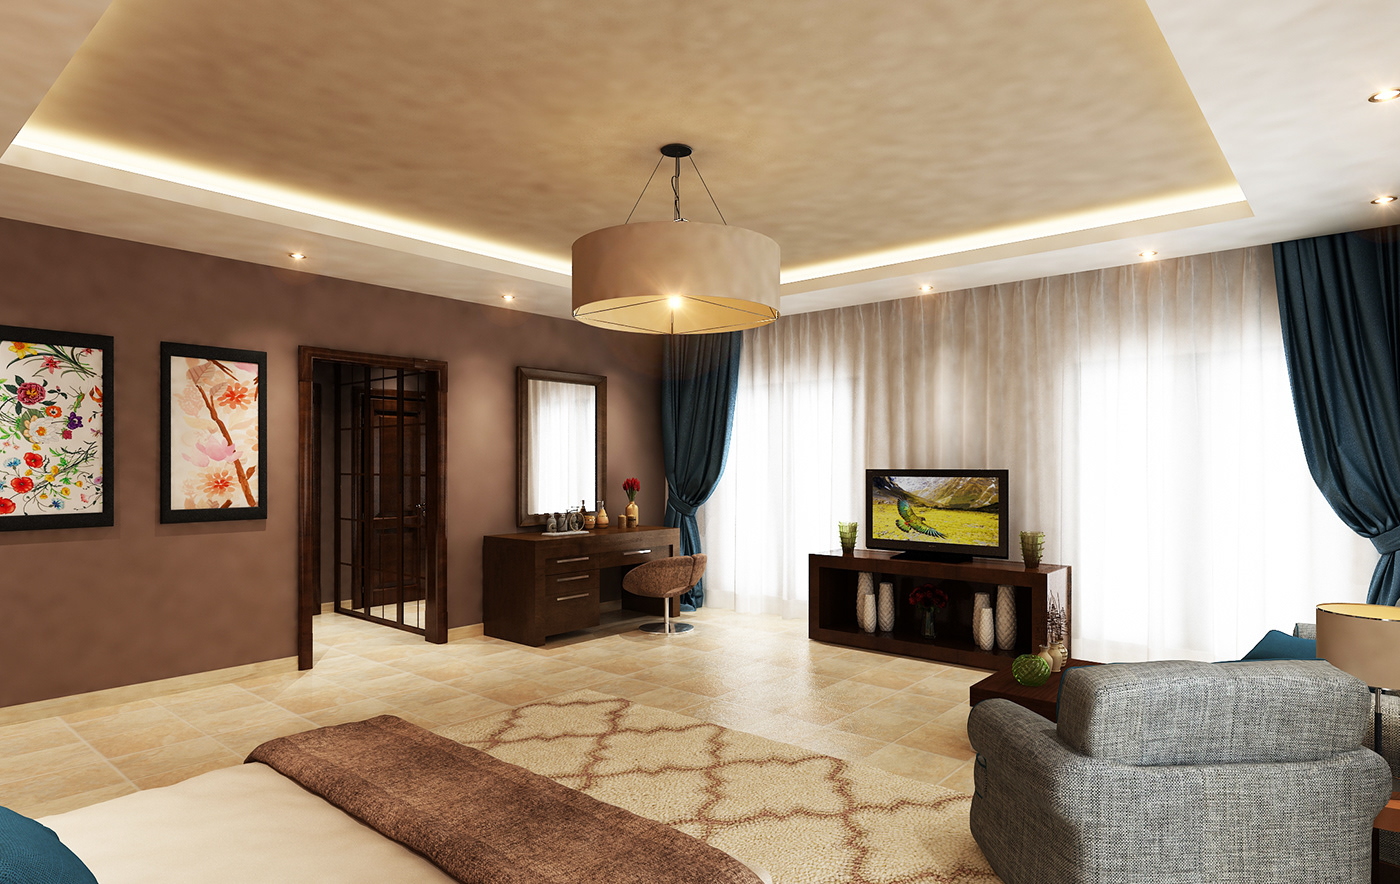 3dsmax 3dvisualization architect AutoCAD homestyle interior design  rendering shop drawnigs vray working drawings